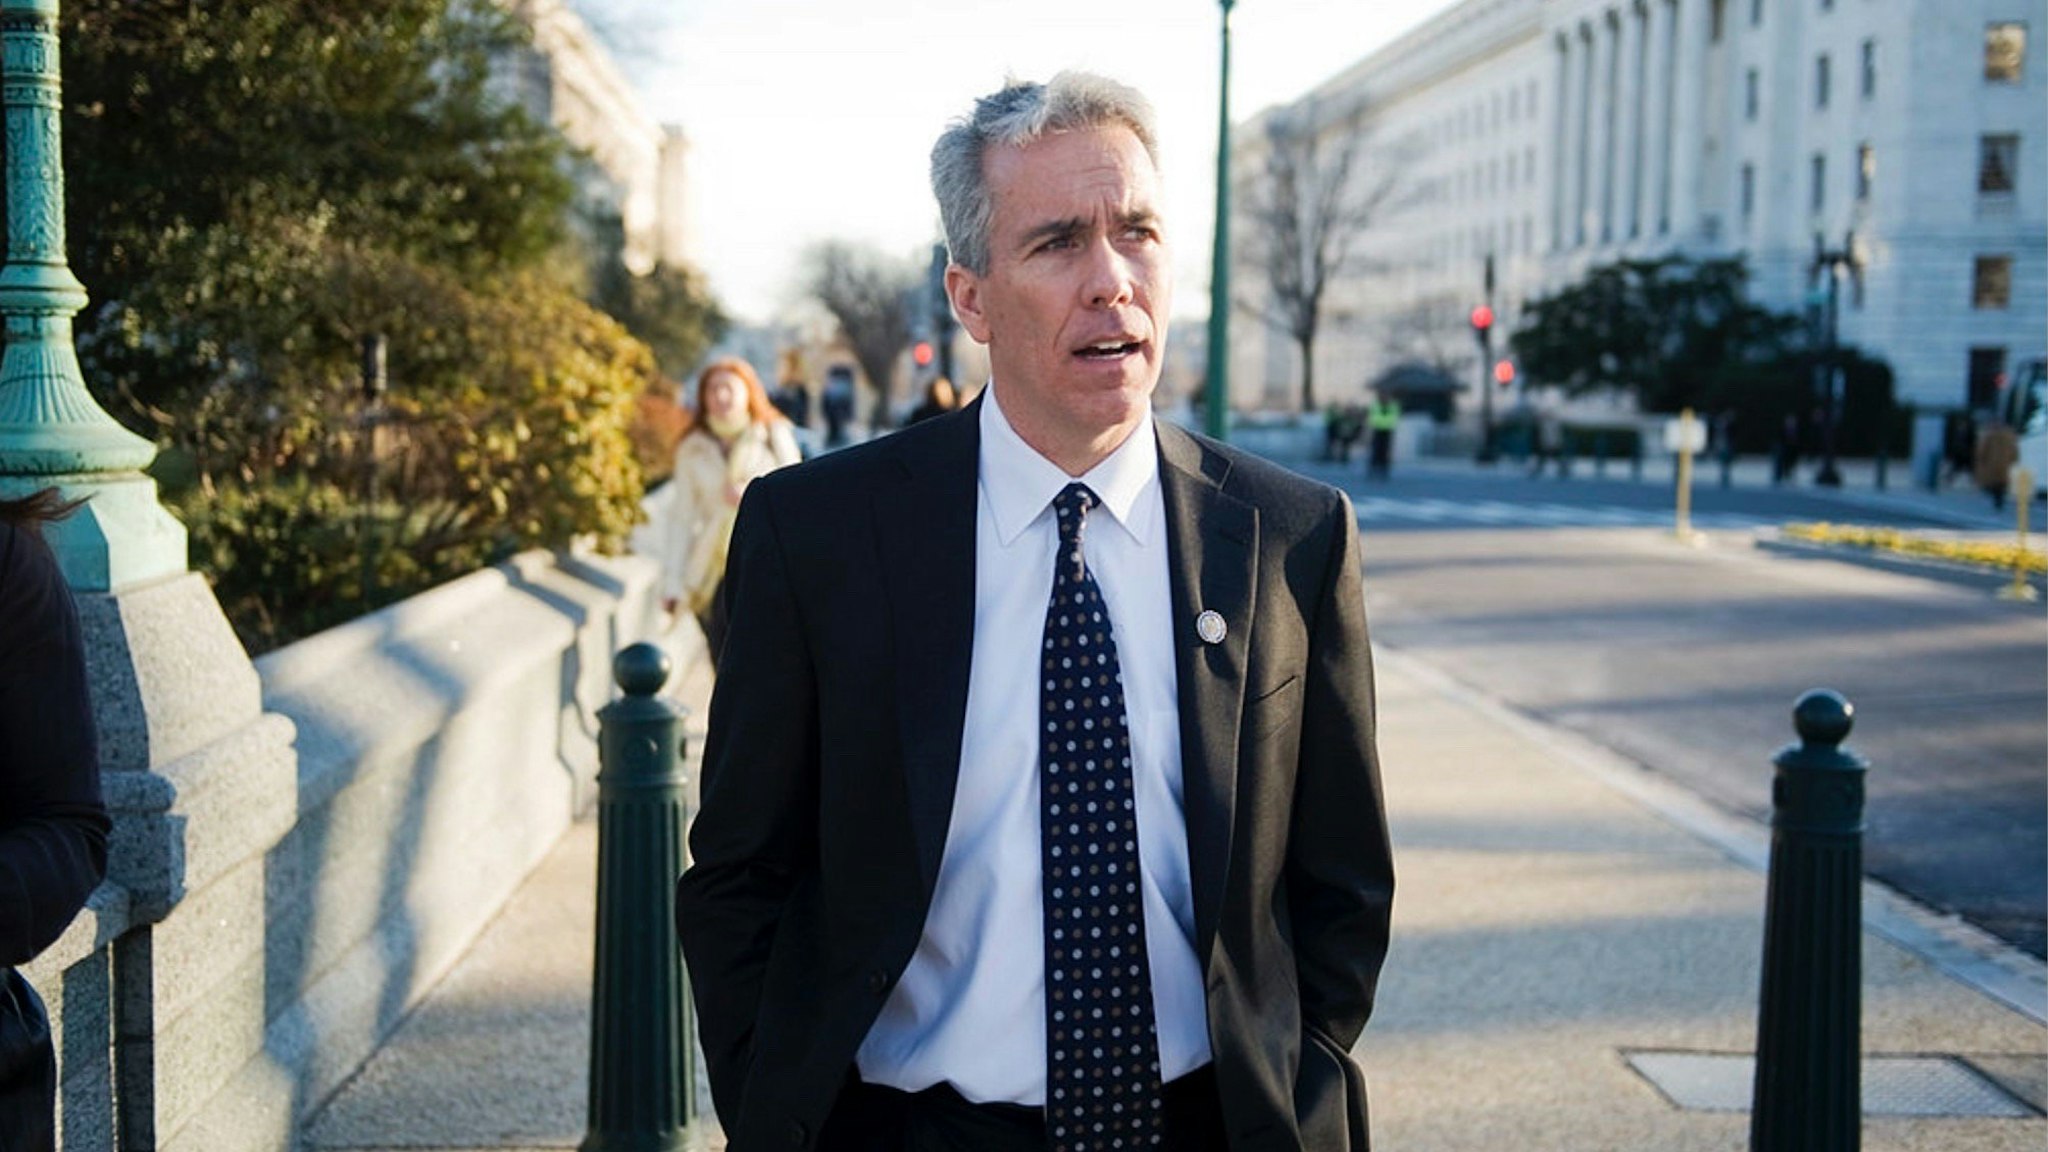 Rep. Joe Walsh, R-Ill., makes his way to the Capitol after being sworn into the 112th Congress.